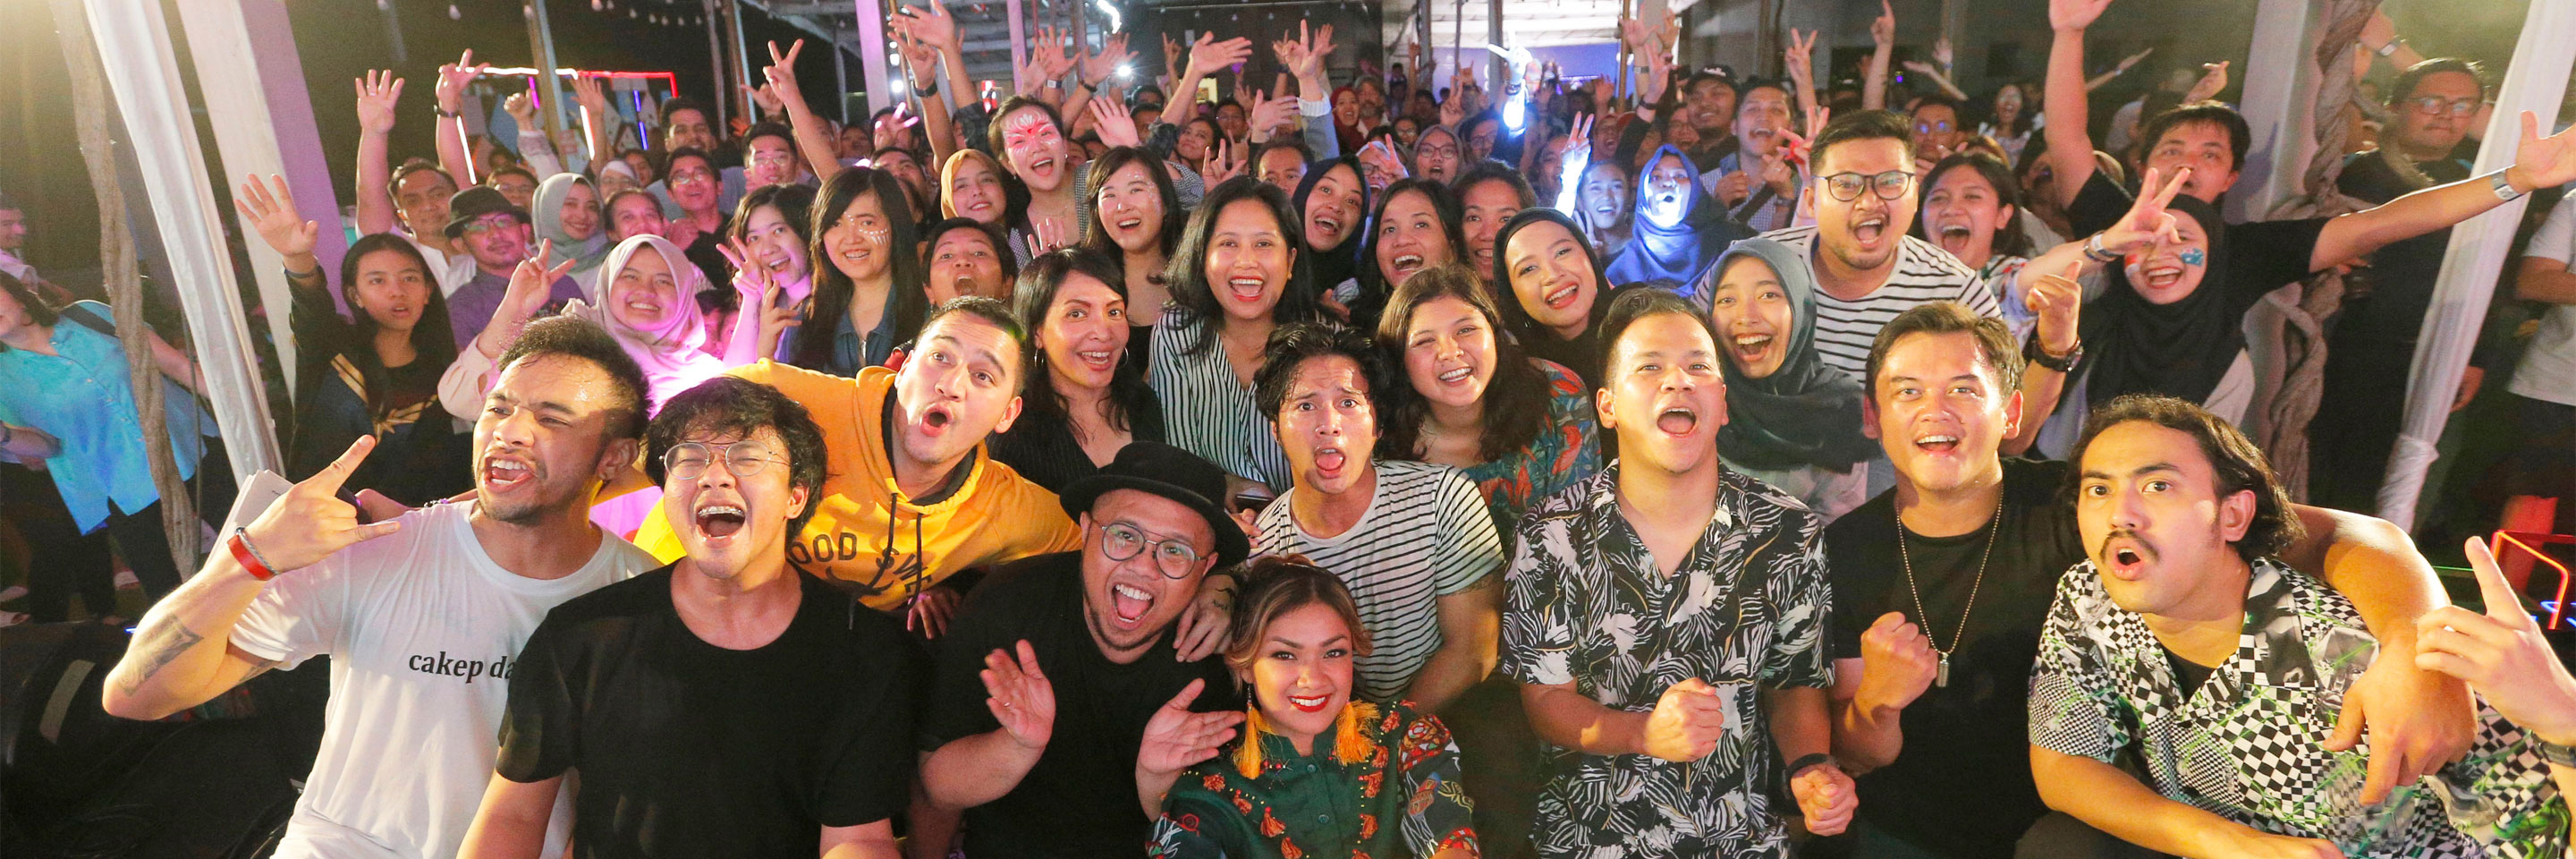 Over 500 Australian alumni are entertained by the talents of an Australian eclectic singer, Indonesia’s famous bands and a special stand-up comedy at the Gig on the Green 2019 in Jakarta.